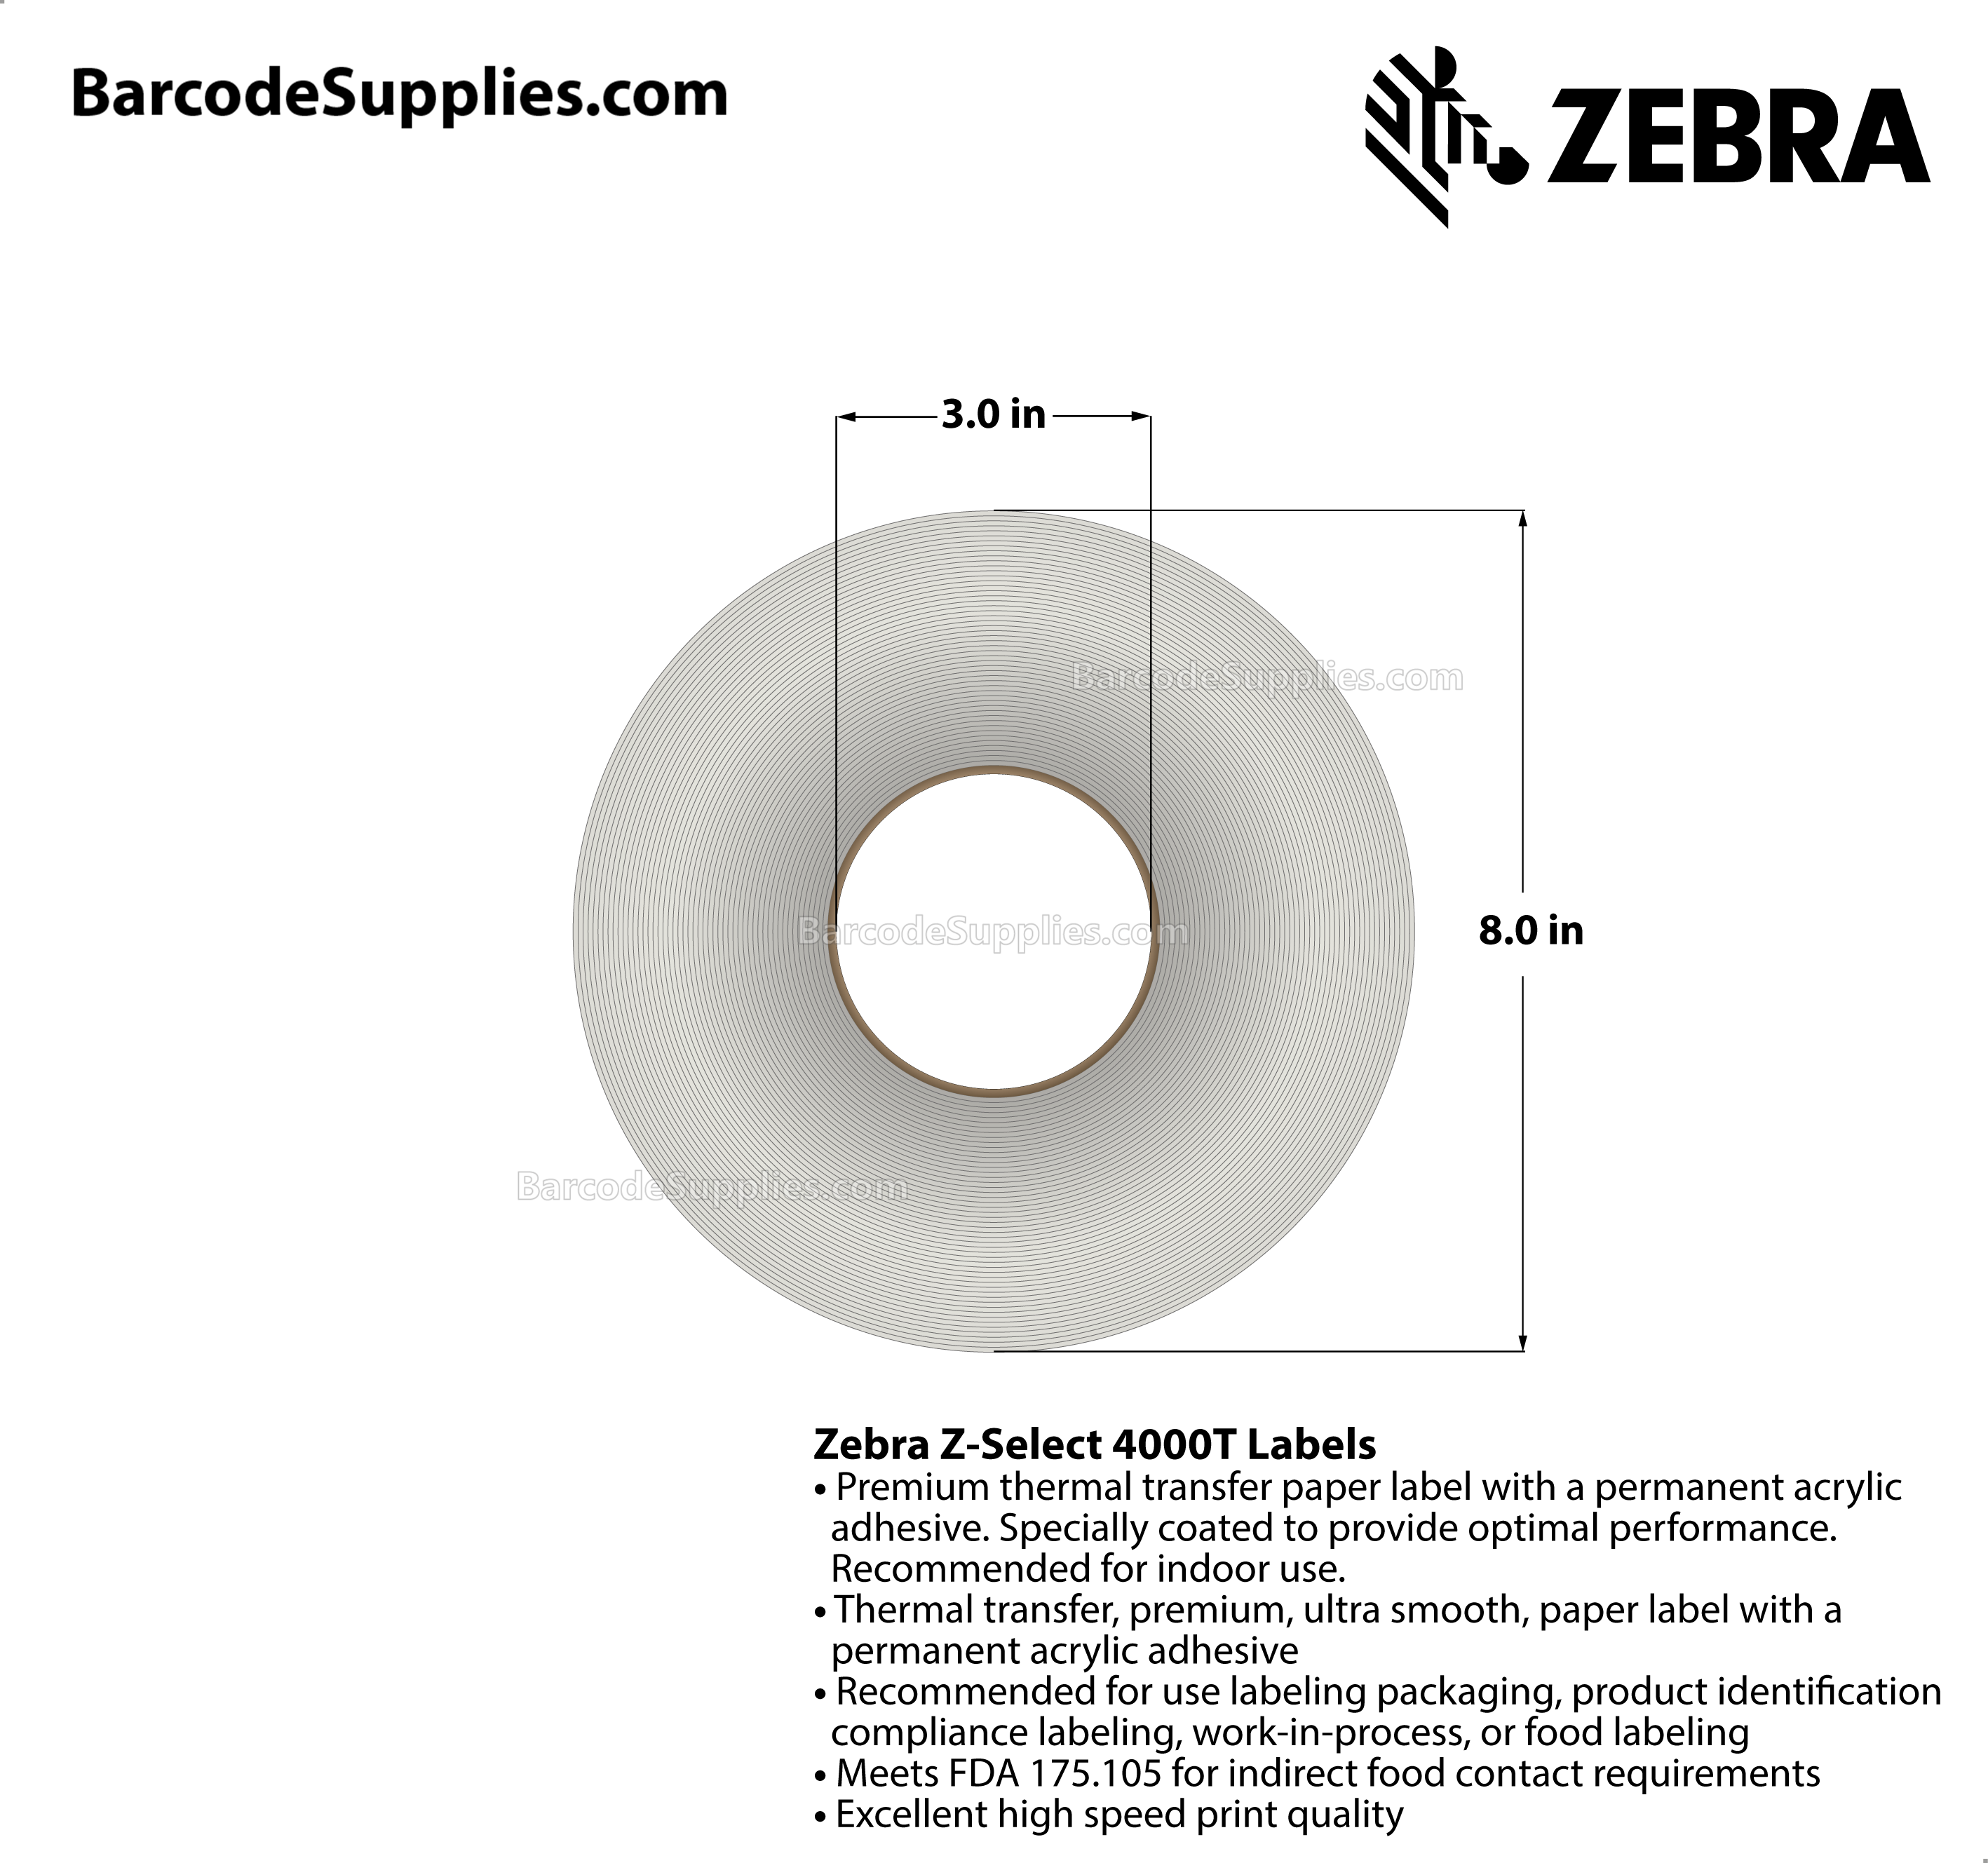 5 x 2.5 Thermal Transfer White Z-Select 4000T Labels With Permanent Adhesive - Not Perforated - 2220 Labels Per Roll - Carton Of 4 Rolls - 8880 Labels Total - MPN: 72298